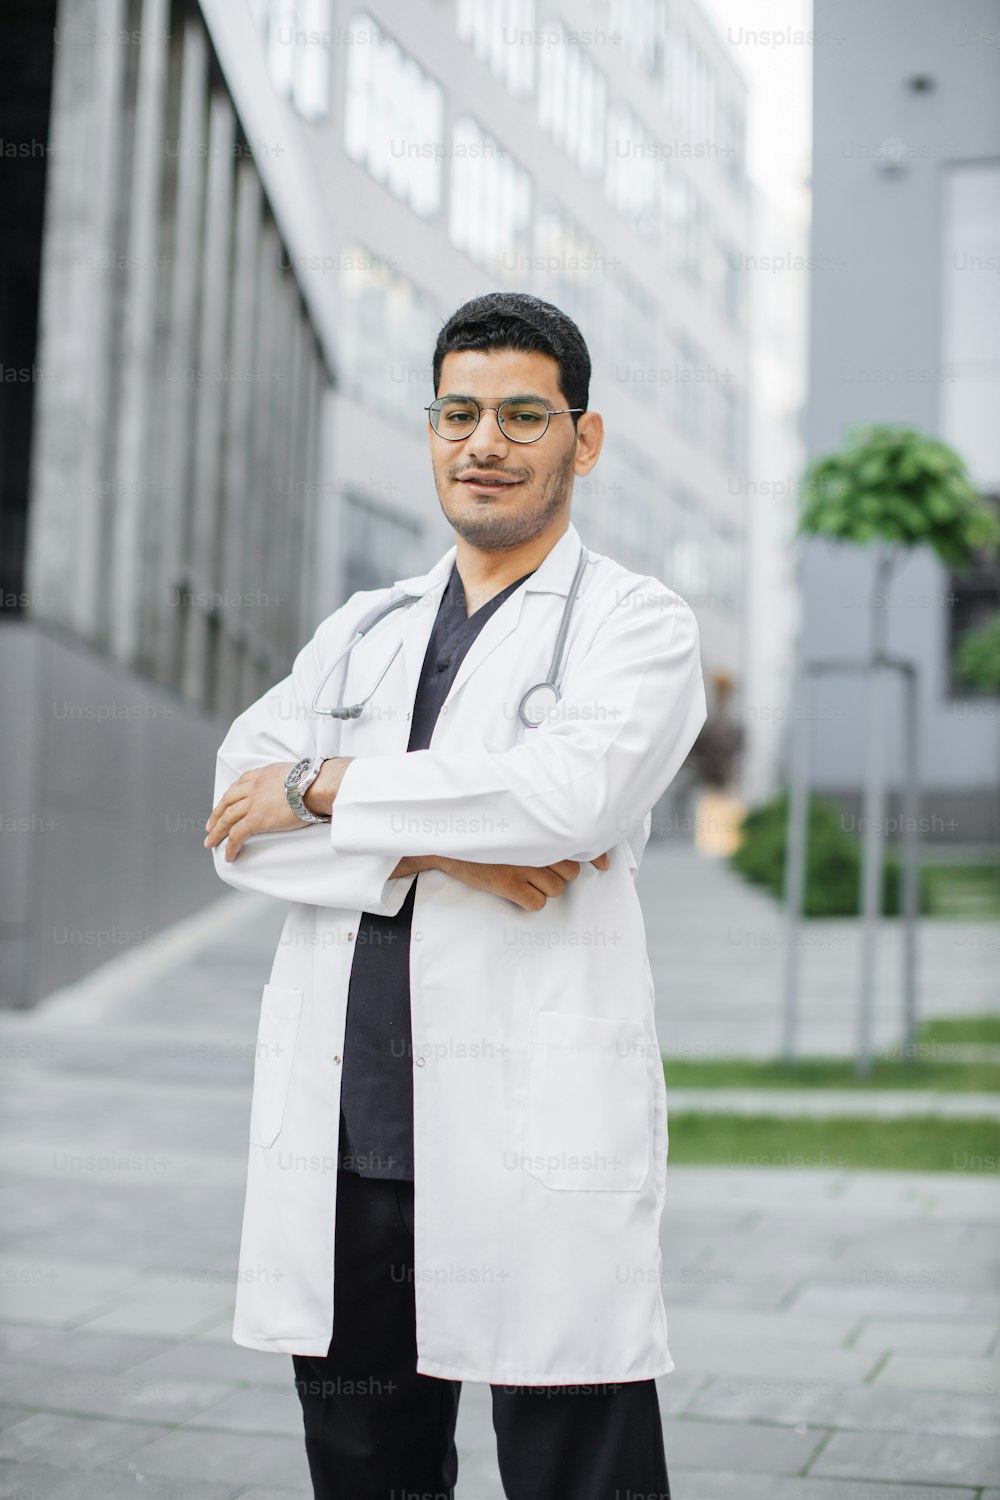 Portrait of young confident Asian Indian medical doctor standing outside hospital building with arms crossed and stethoscope around neck. Healthcare professional portrait